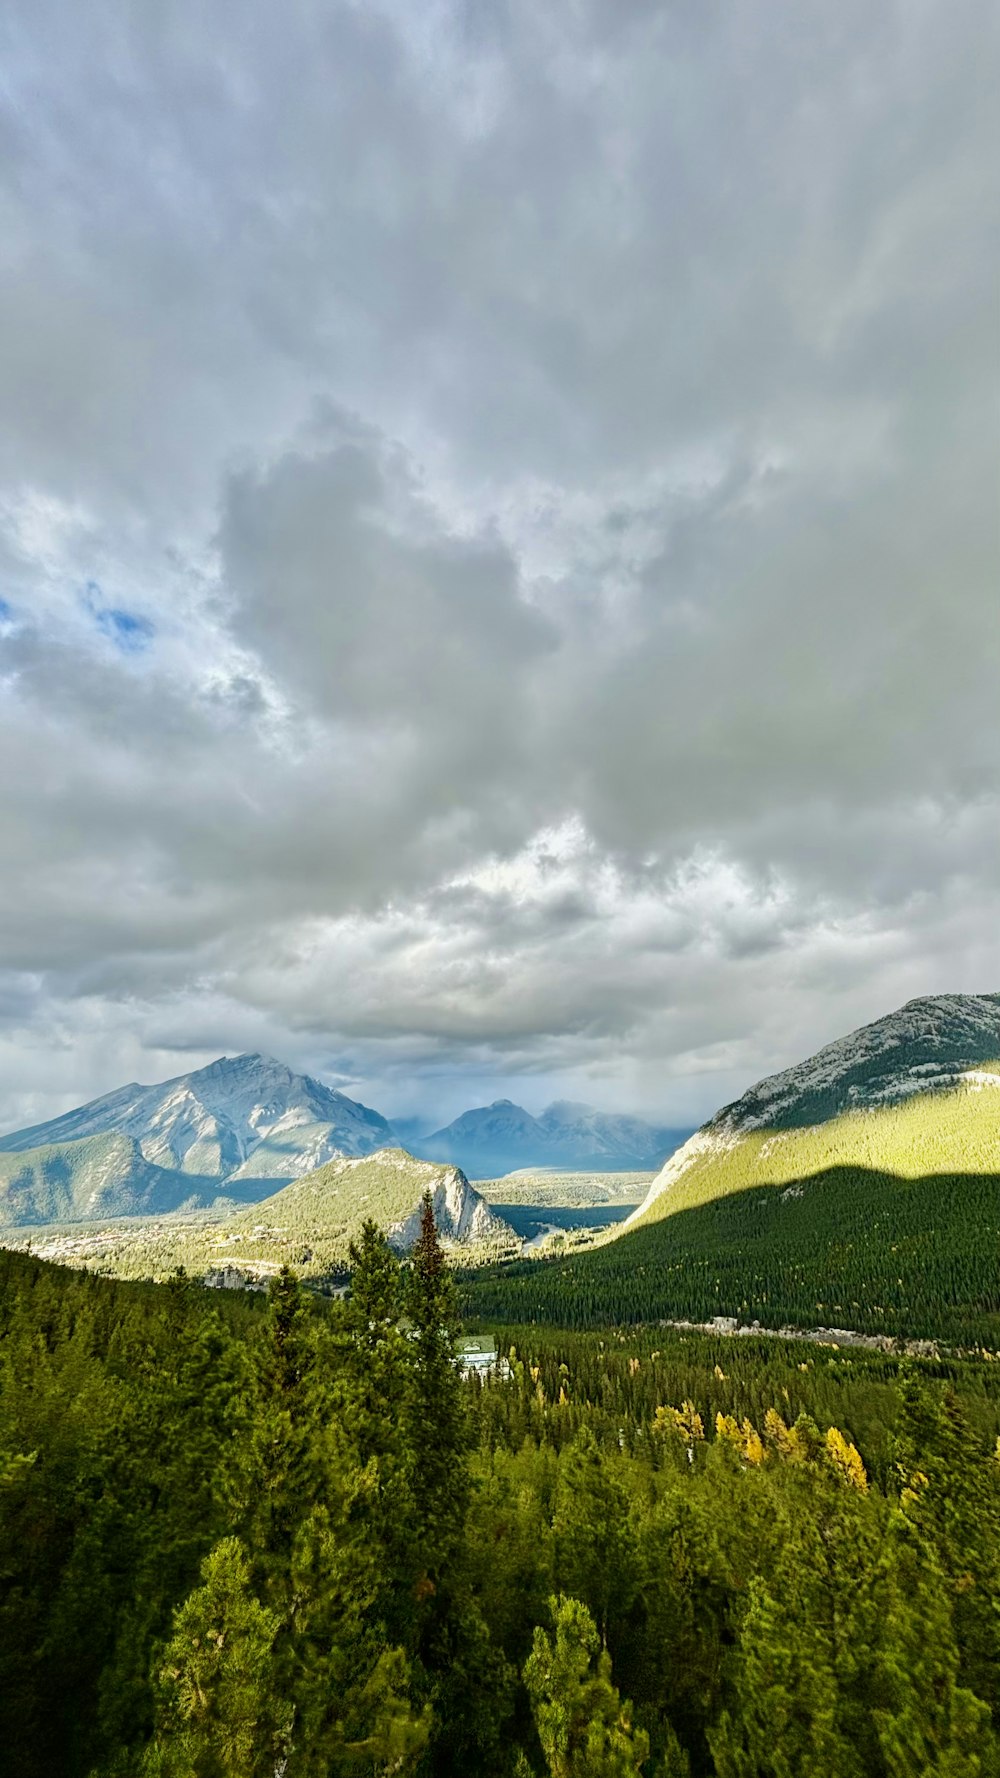 a scenic view of mountains and trees under a cloudy sky